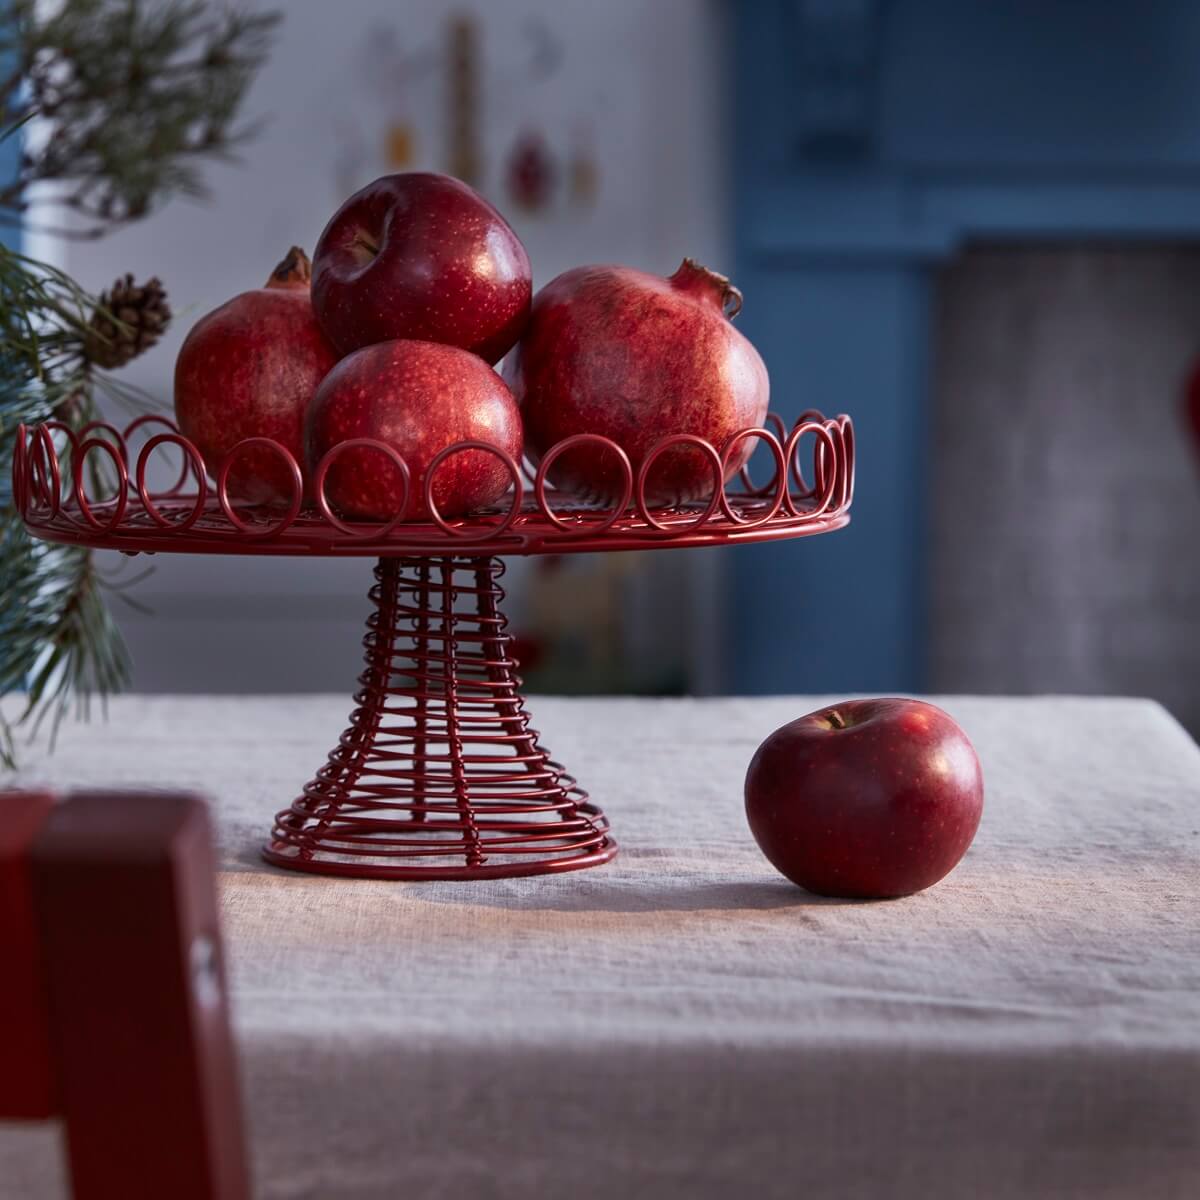 ikea-christmas-serving-stand-nordroom